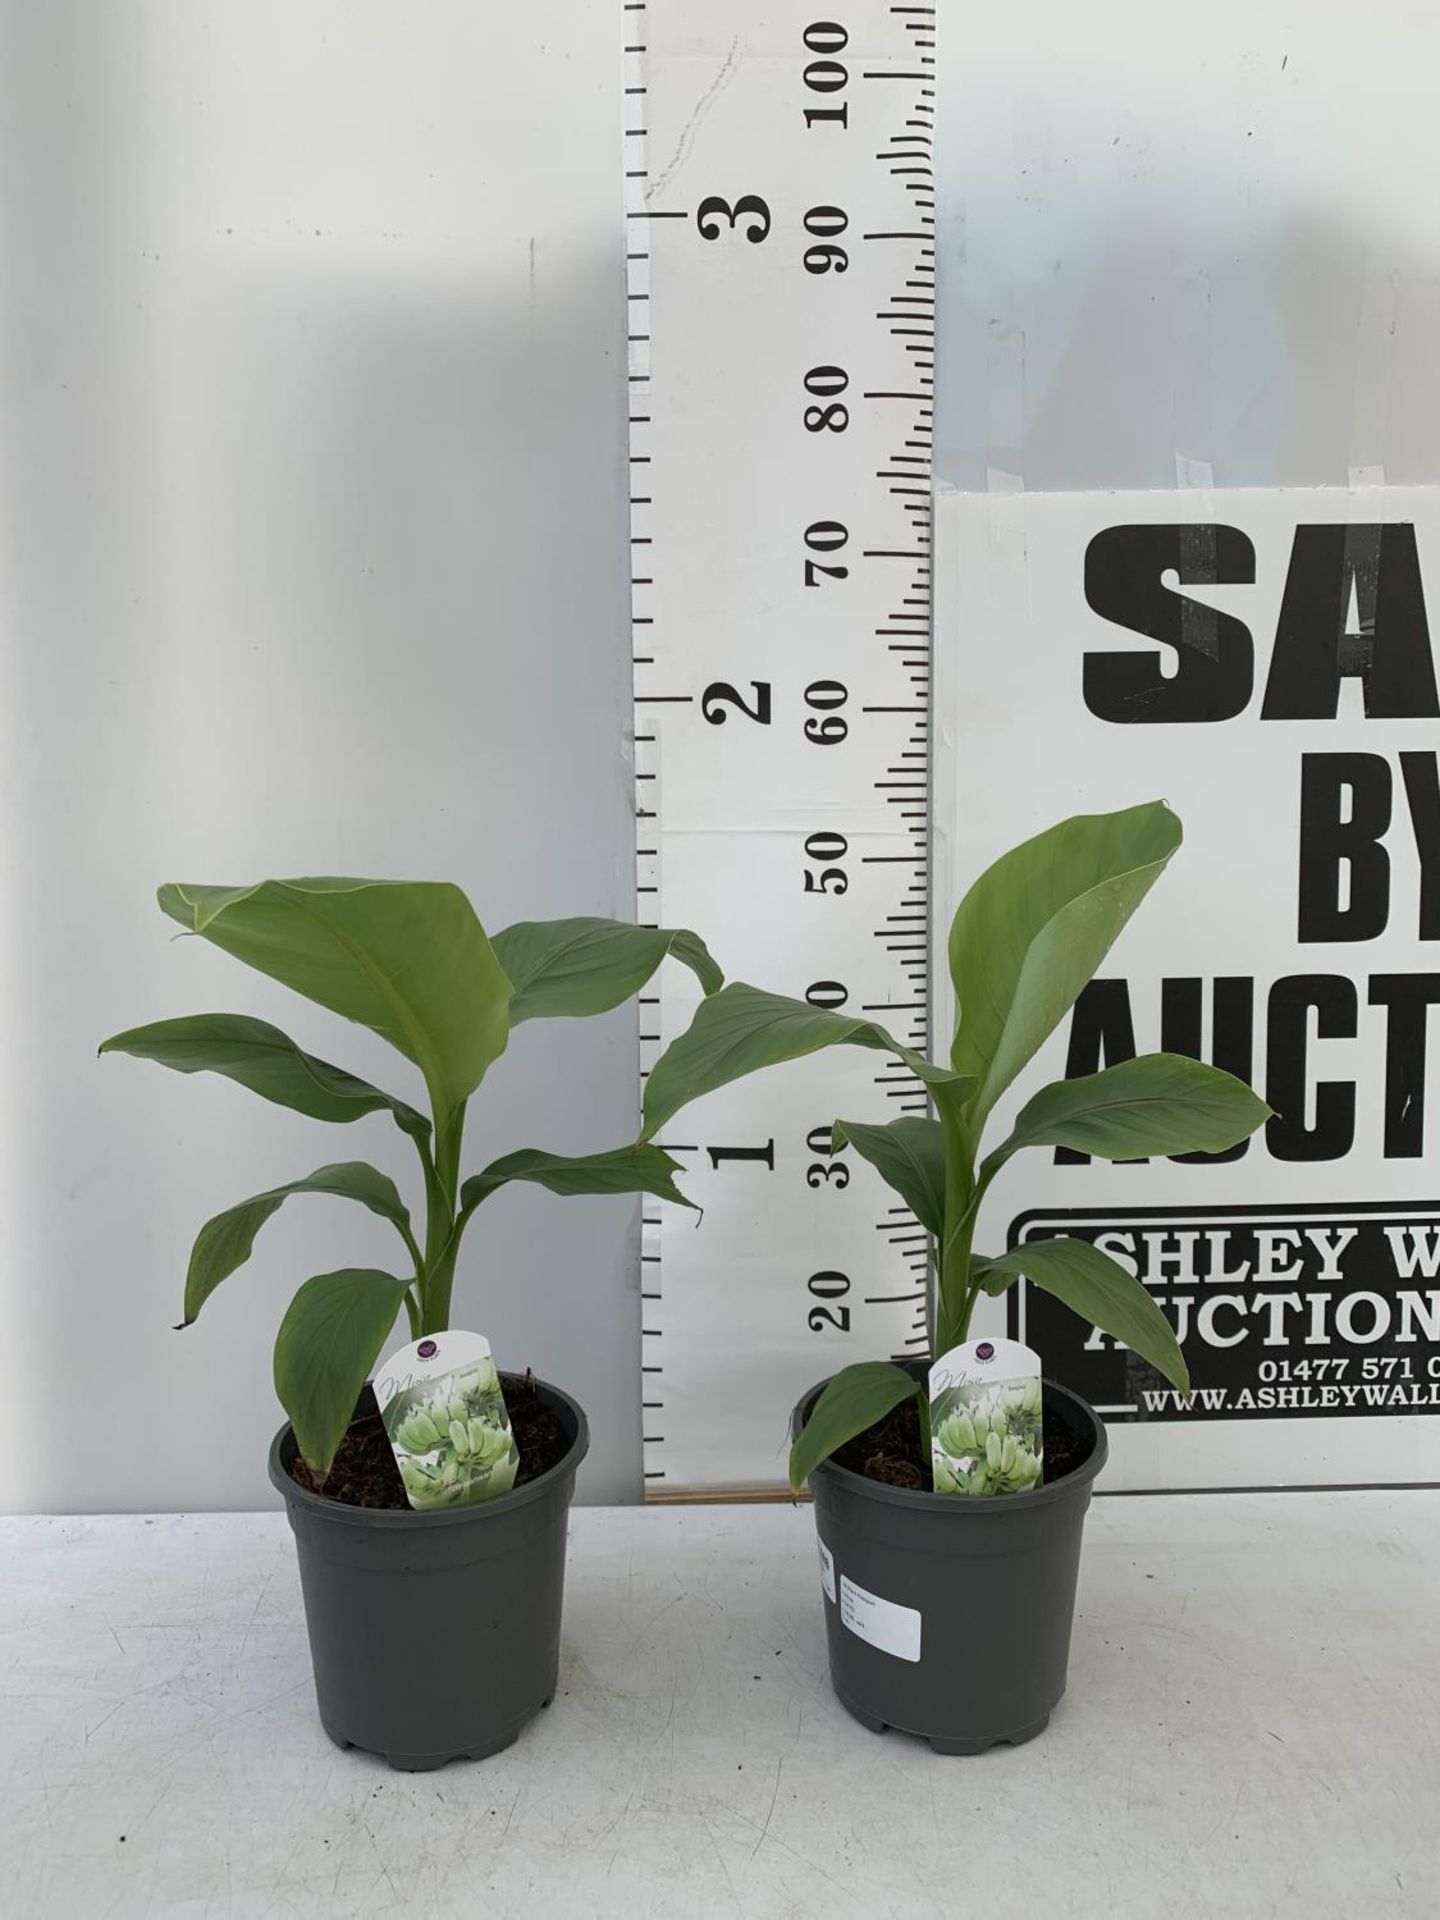 TWO MUSA BASJOO BANANA PLANTS IN 2 LTR POTS 45CM TALL TO BE SOLD FOR THE TWO NO VAT